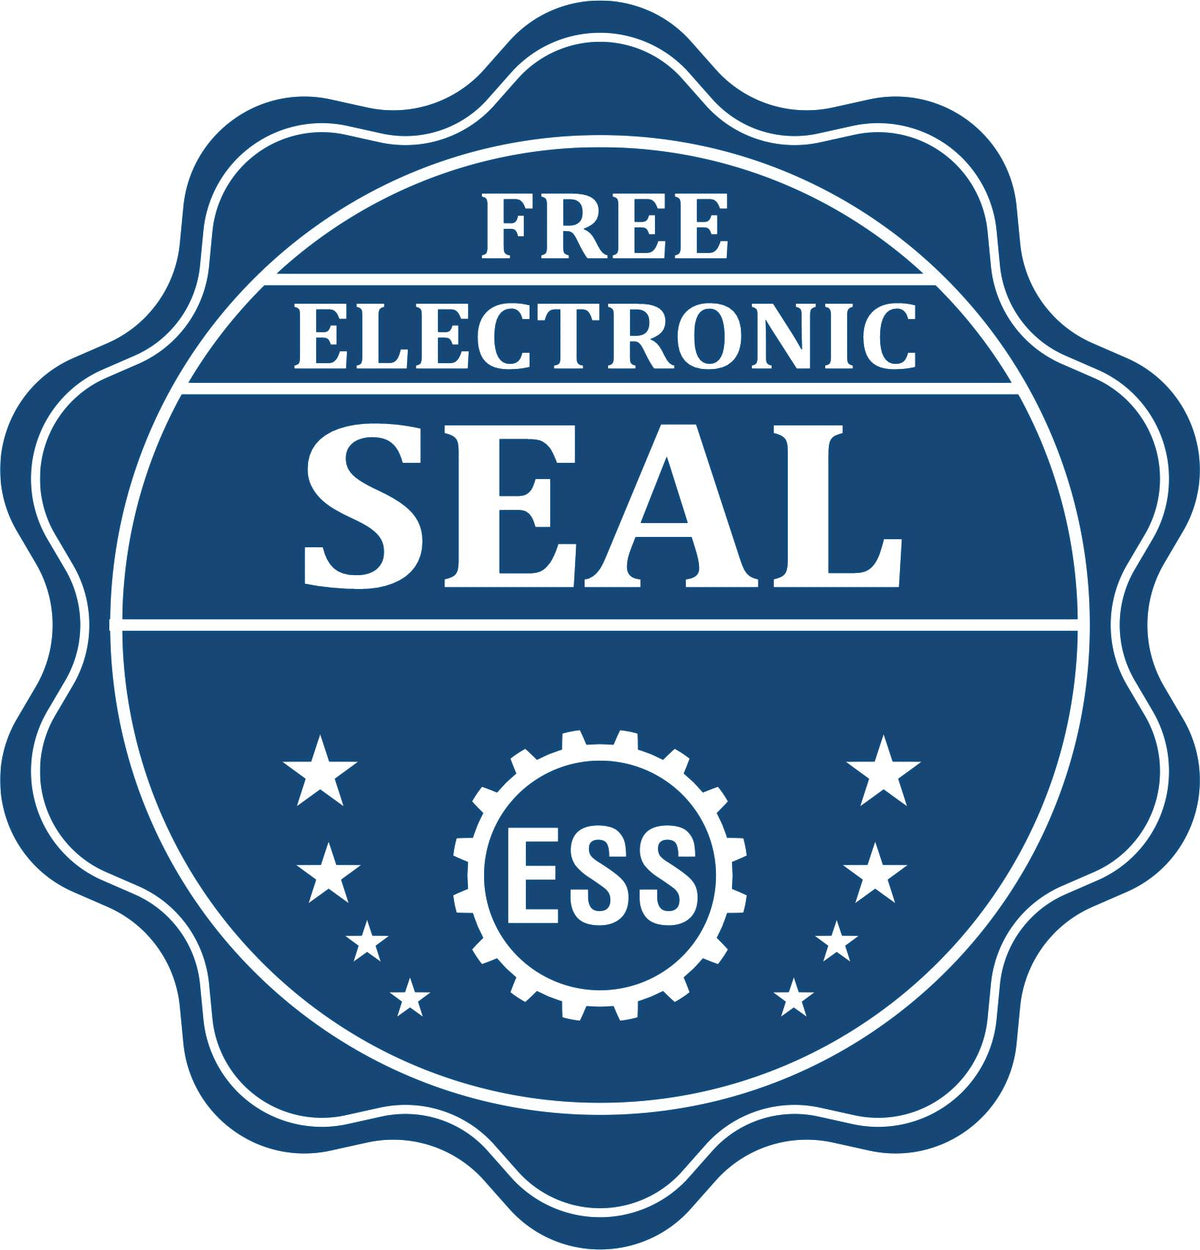 A badge showing a free electronic seal for the Wooden Handle Montana State Seal Notary Public Stamp with stars and the ESS gear on the emblem.